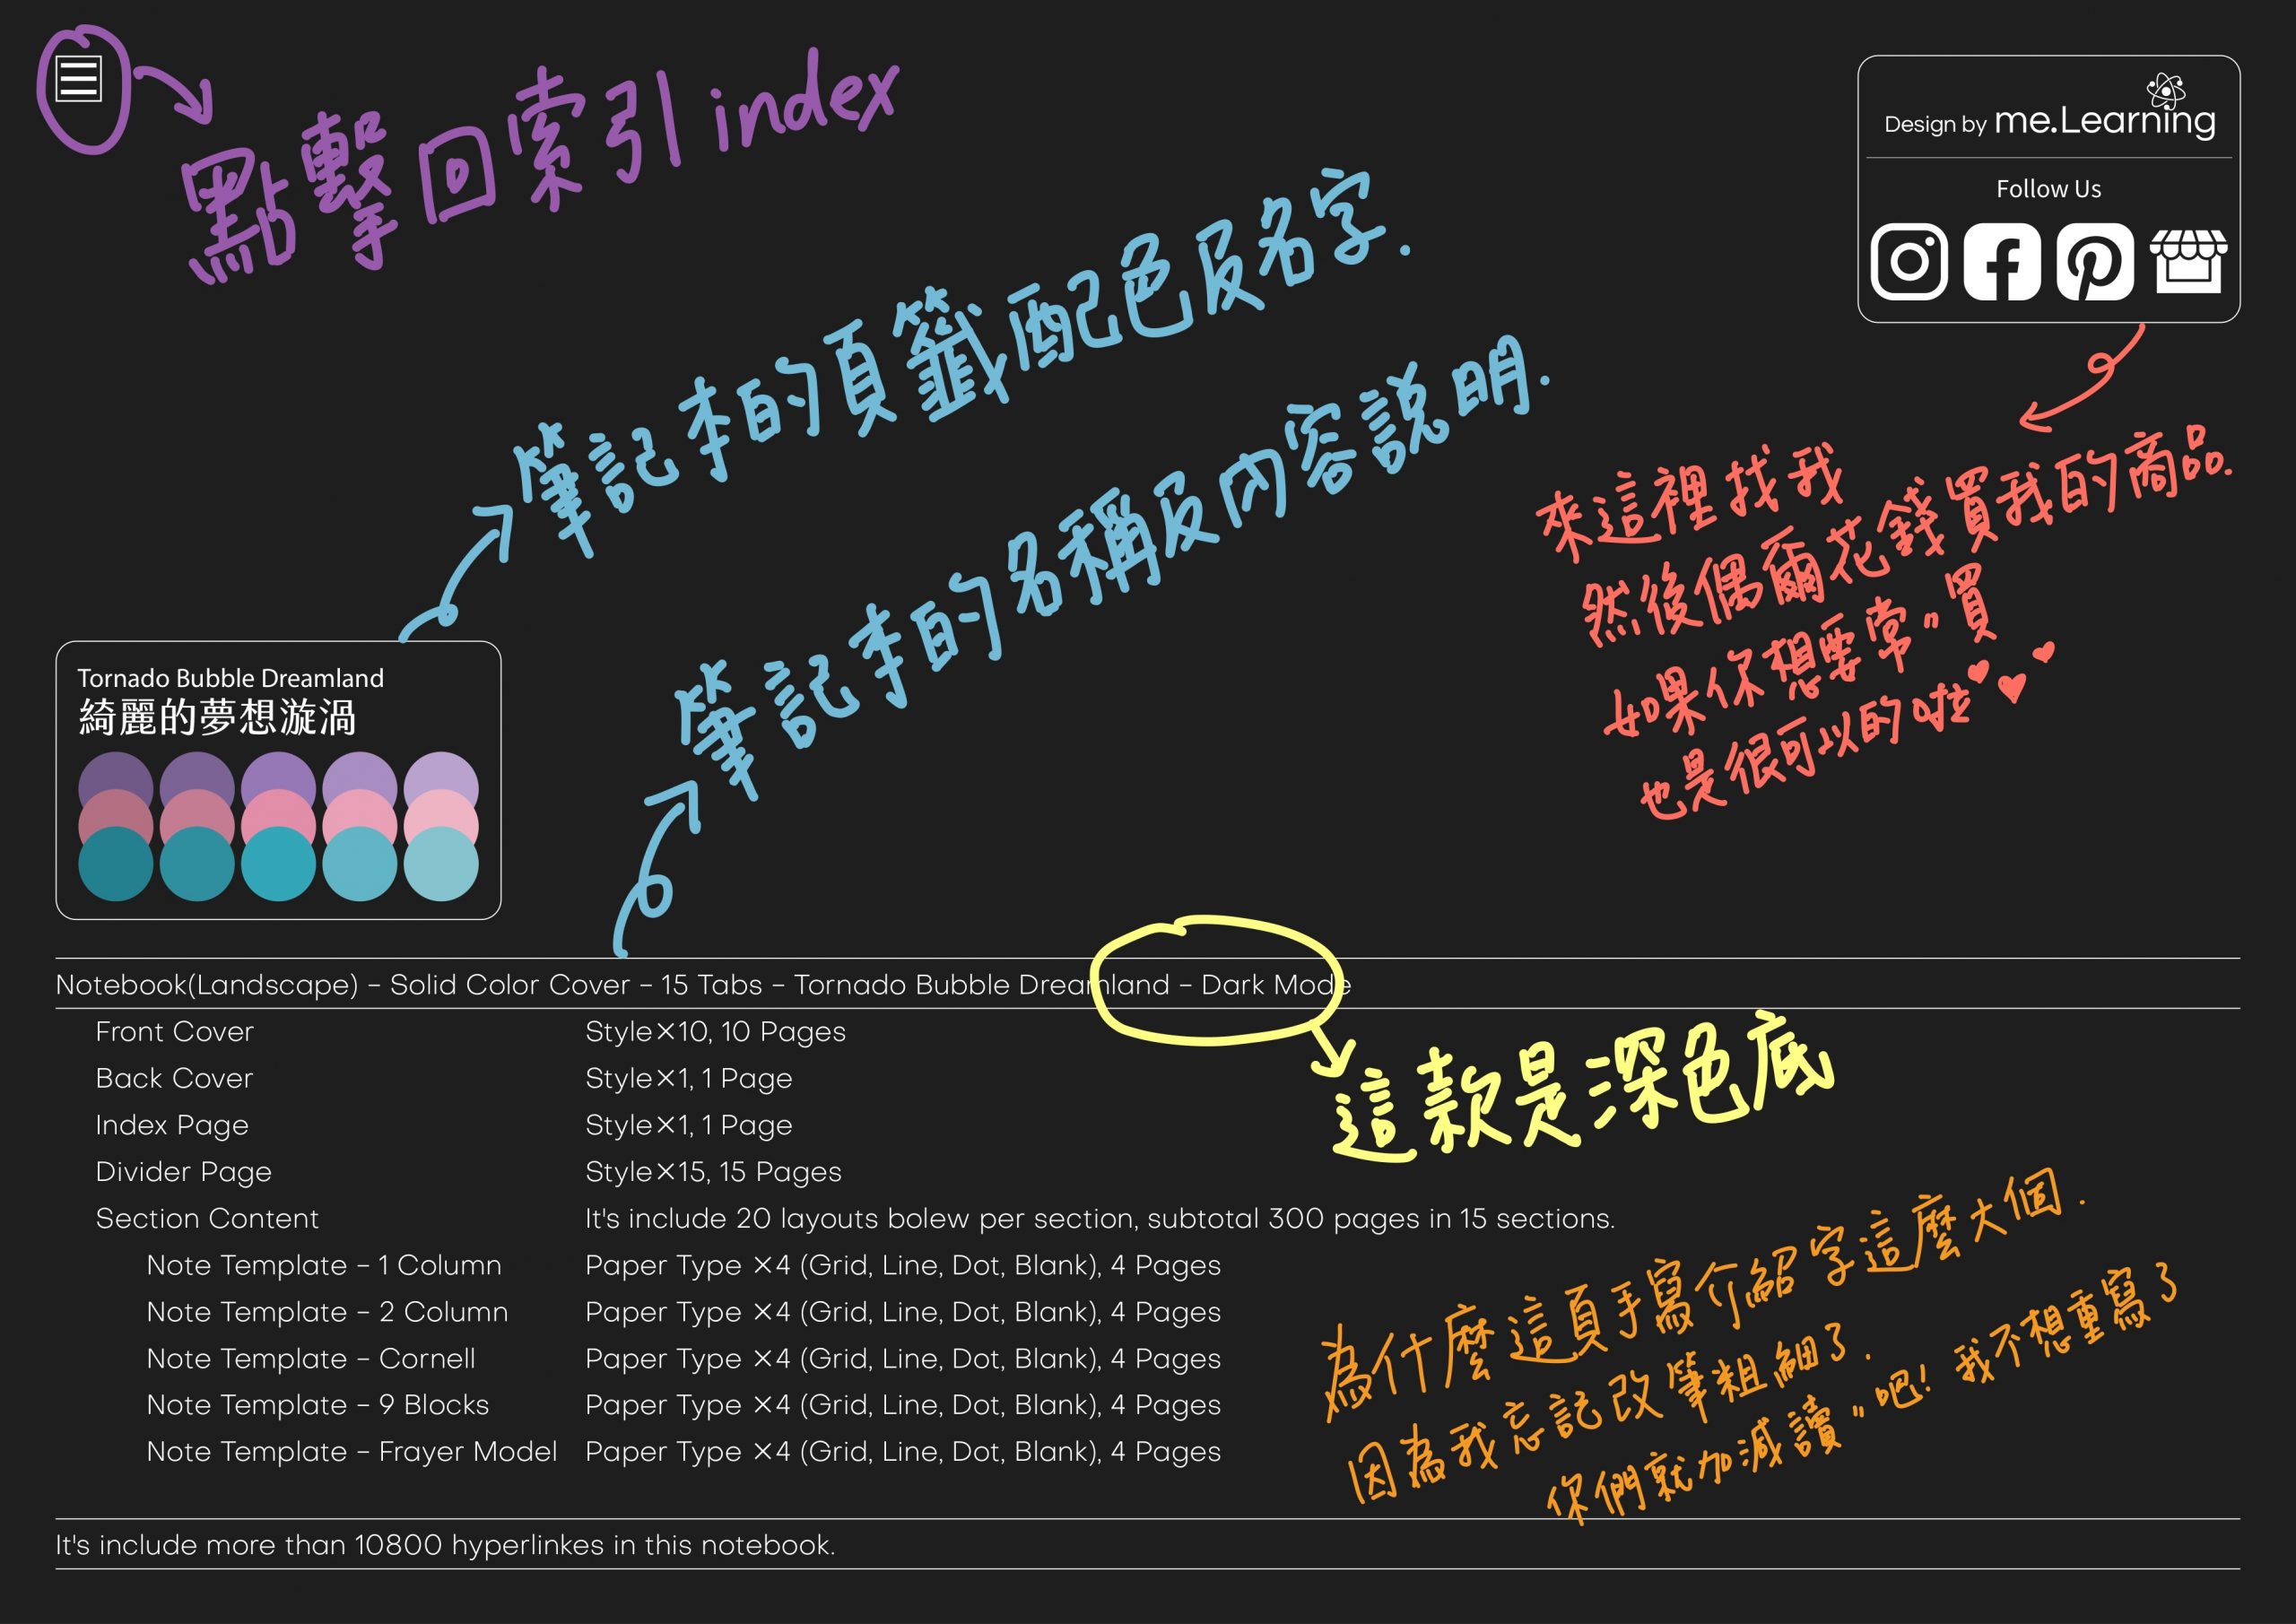 Notebook-Landscape-Solid Color Cover-15 Tabs-Tornado Bubble Dreamland-Dark Mode 封底手寫說明 | me.Learning